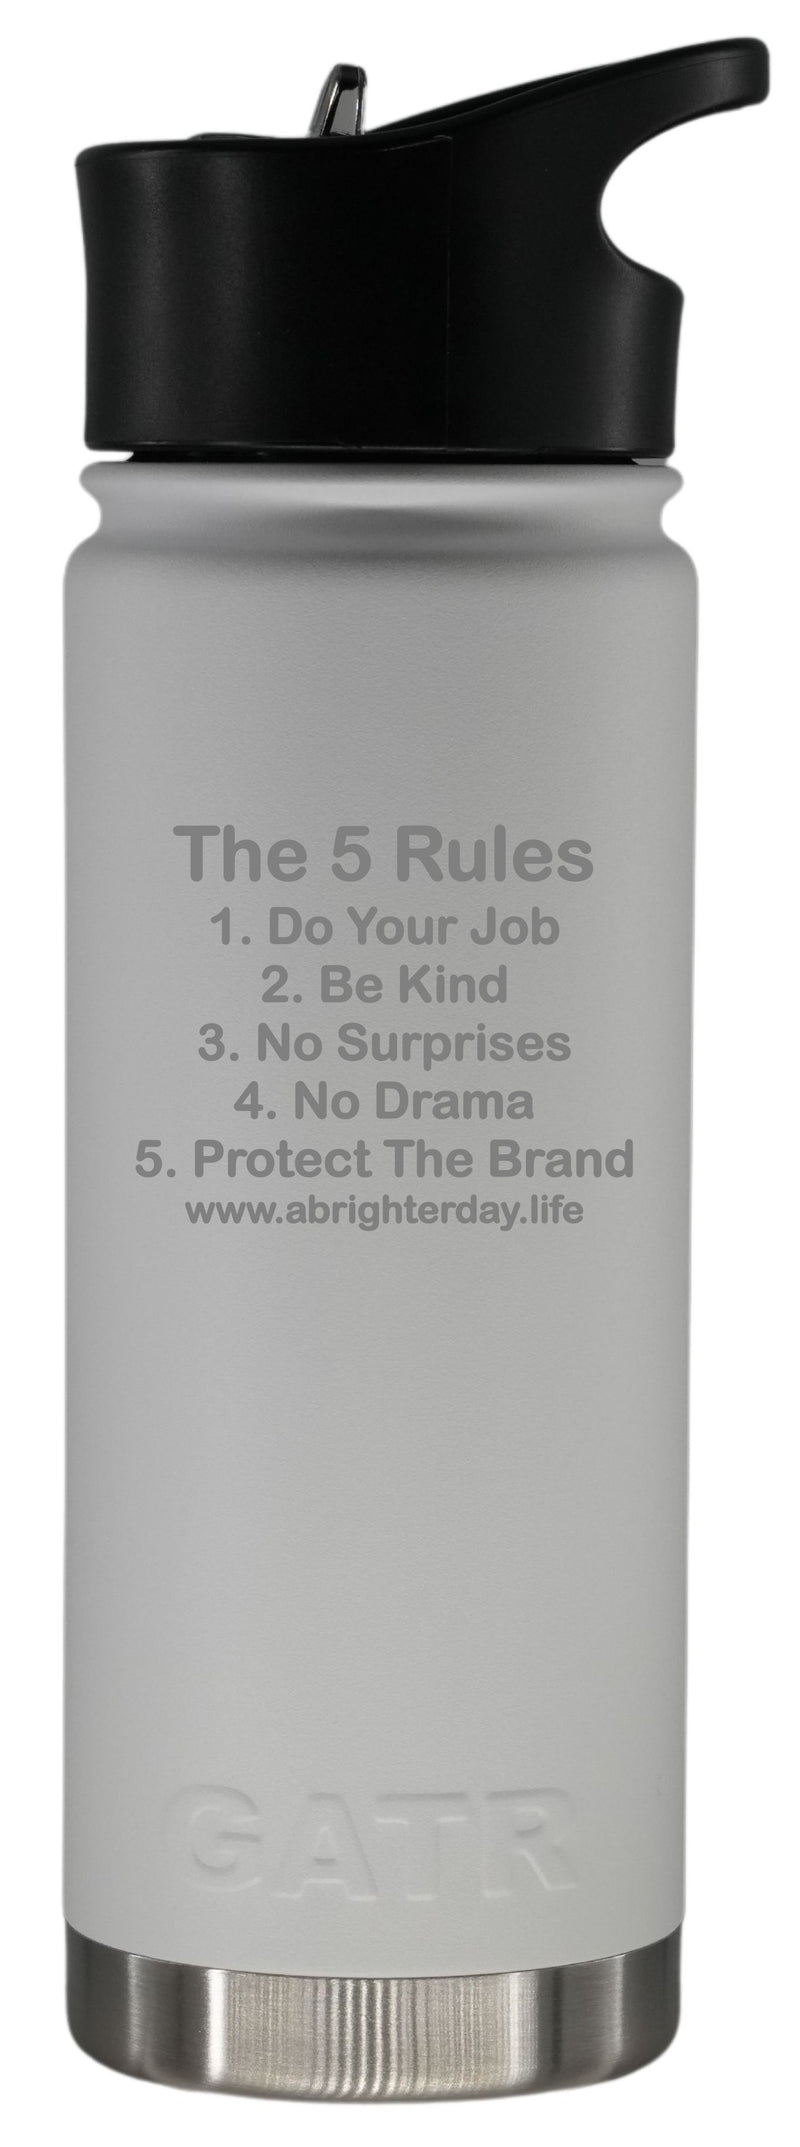 The 5 Rules 18oz Bottle